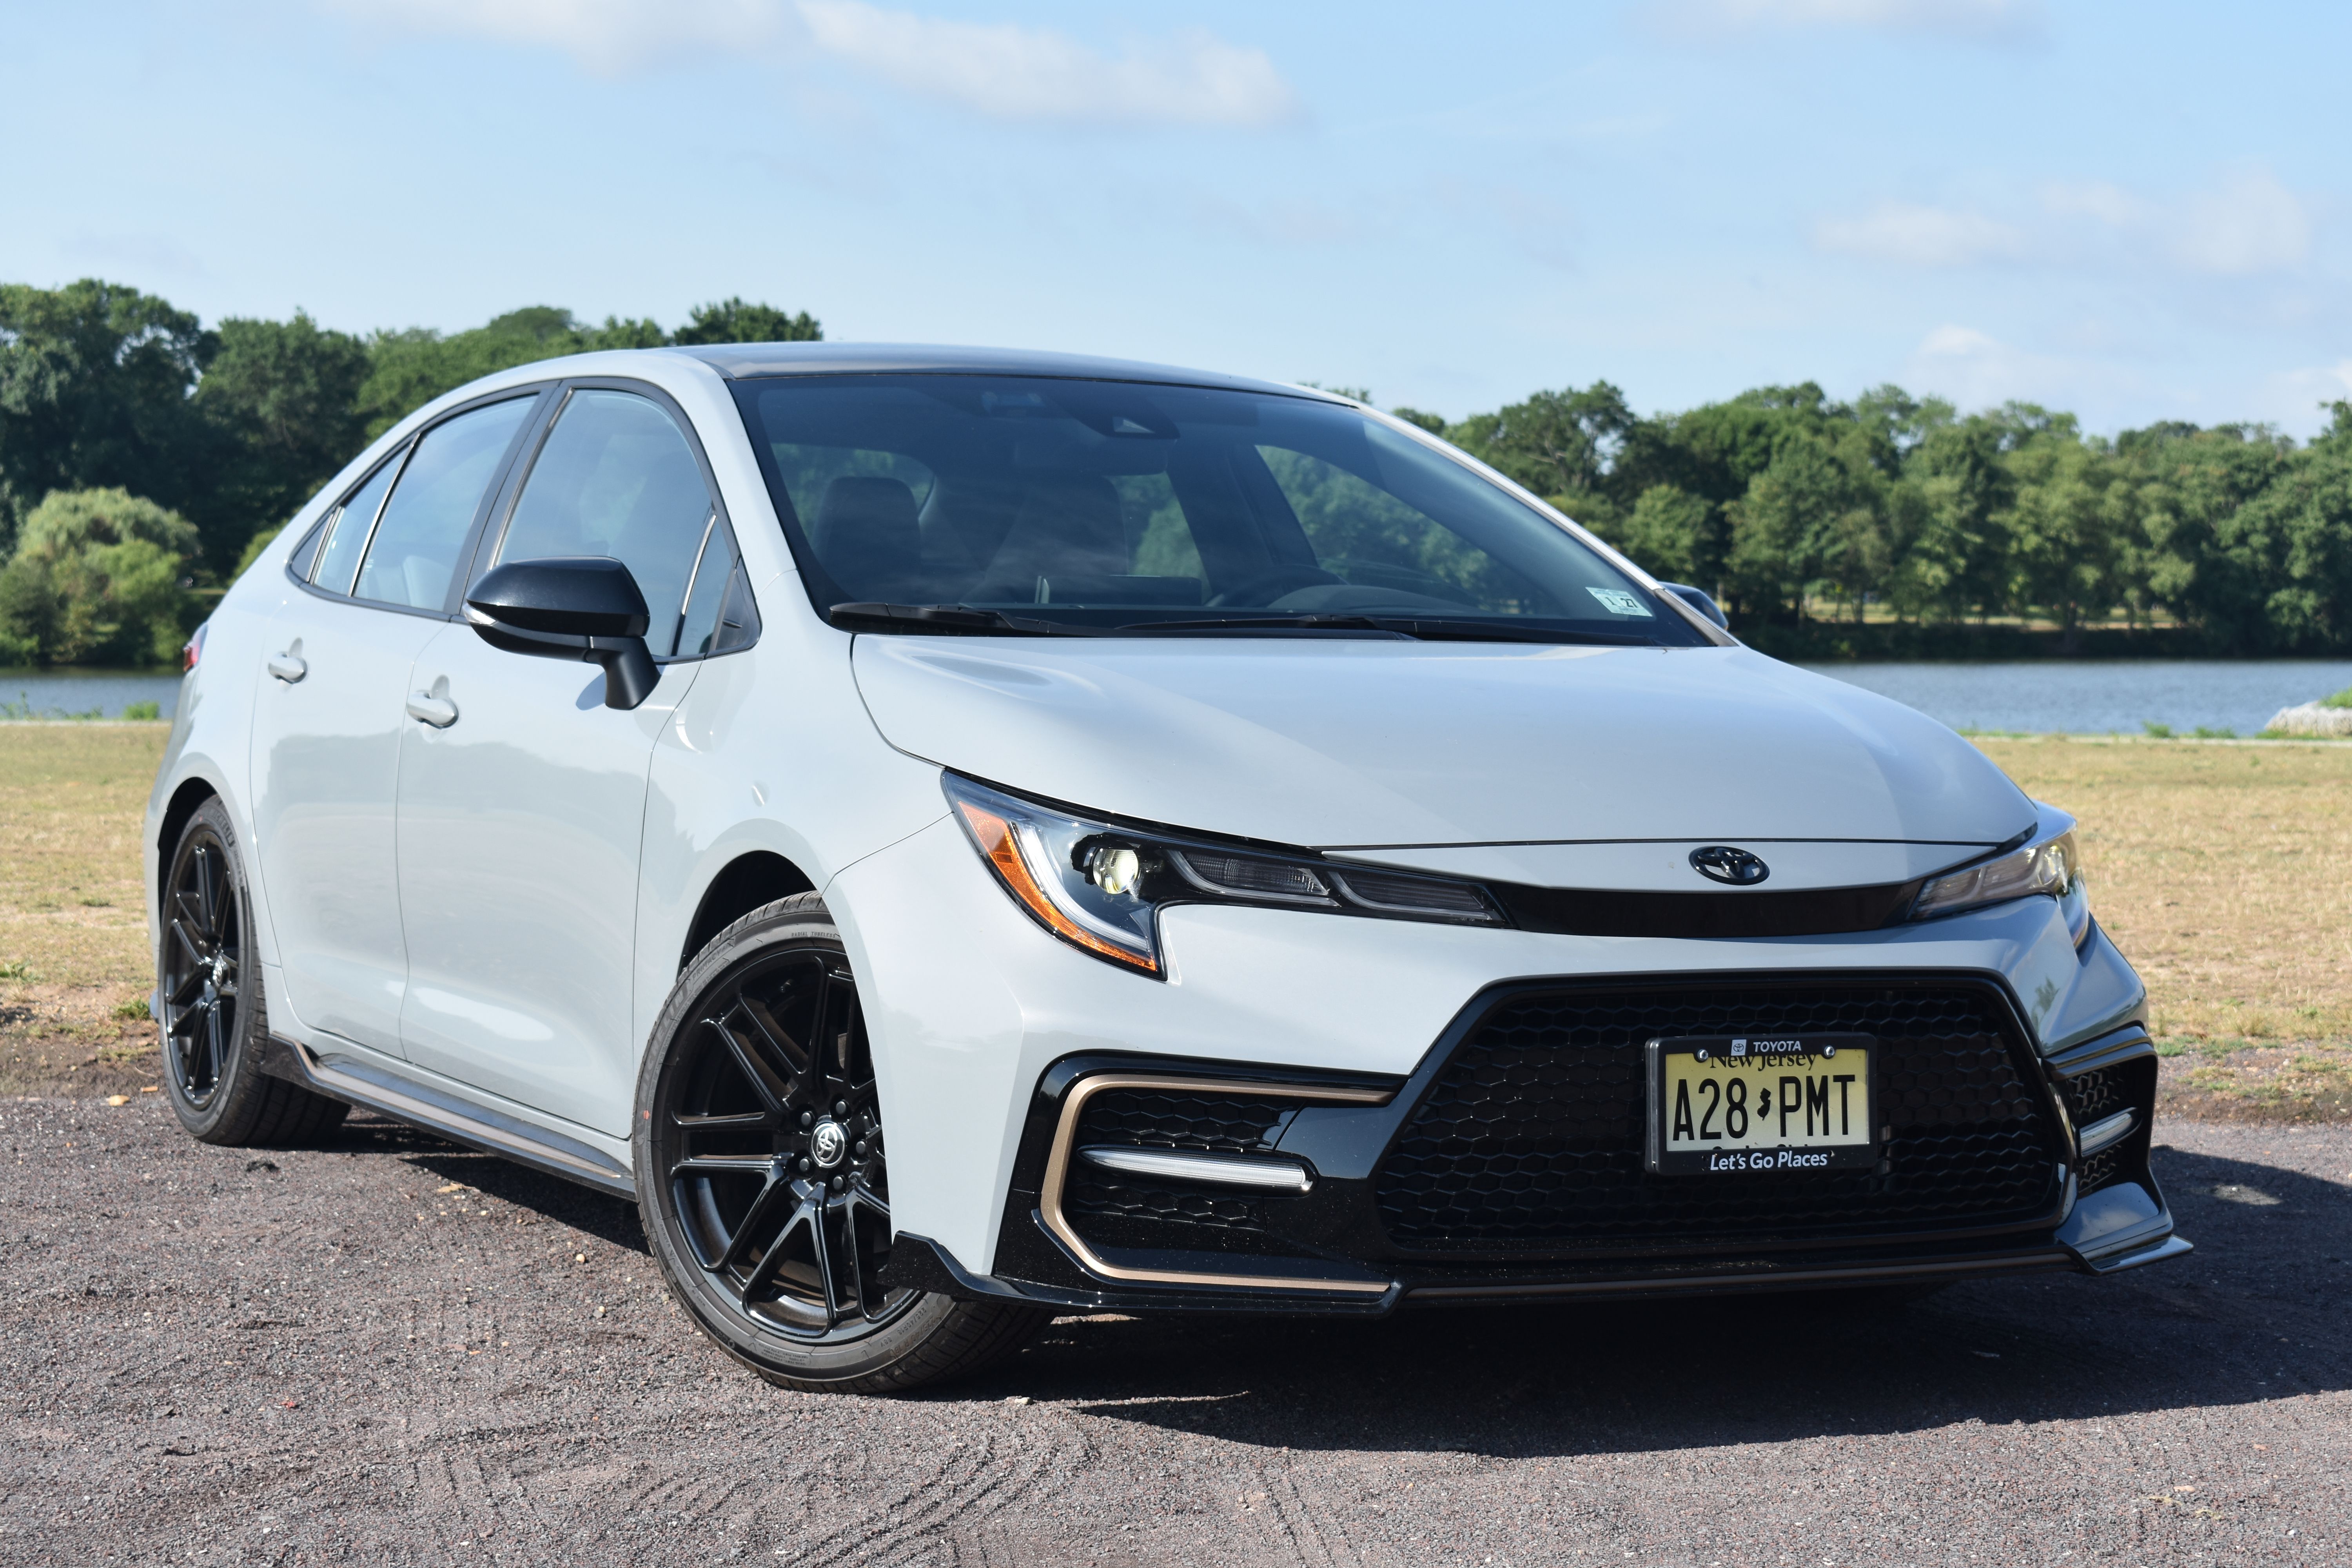 2022 Toyota Corolla APEX Review: The Sporty Compact Car For The Enthusiast